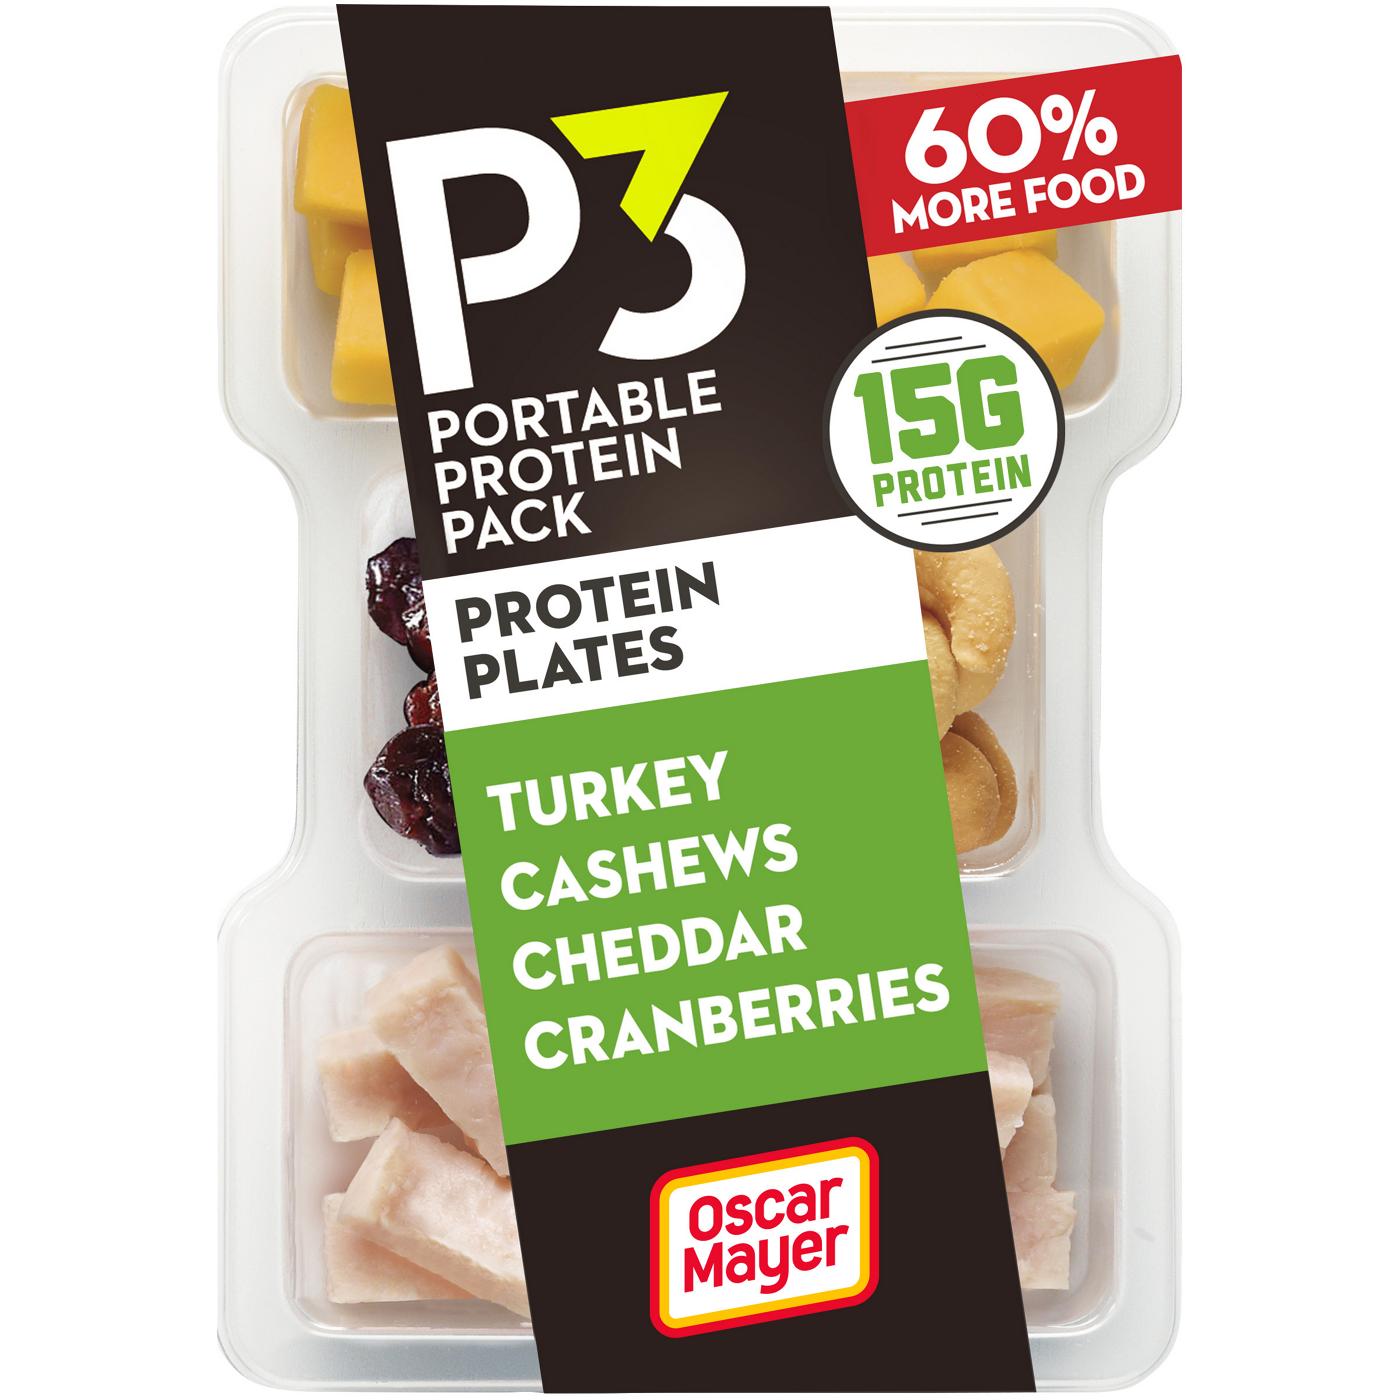 P3 Portable Protein Pack Protein Plates Snack Tray - Turkey, Cashews, Cheddar & Cranberries; image 1 of 4